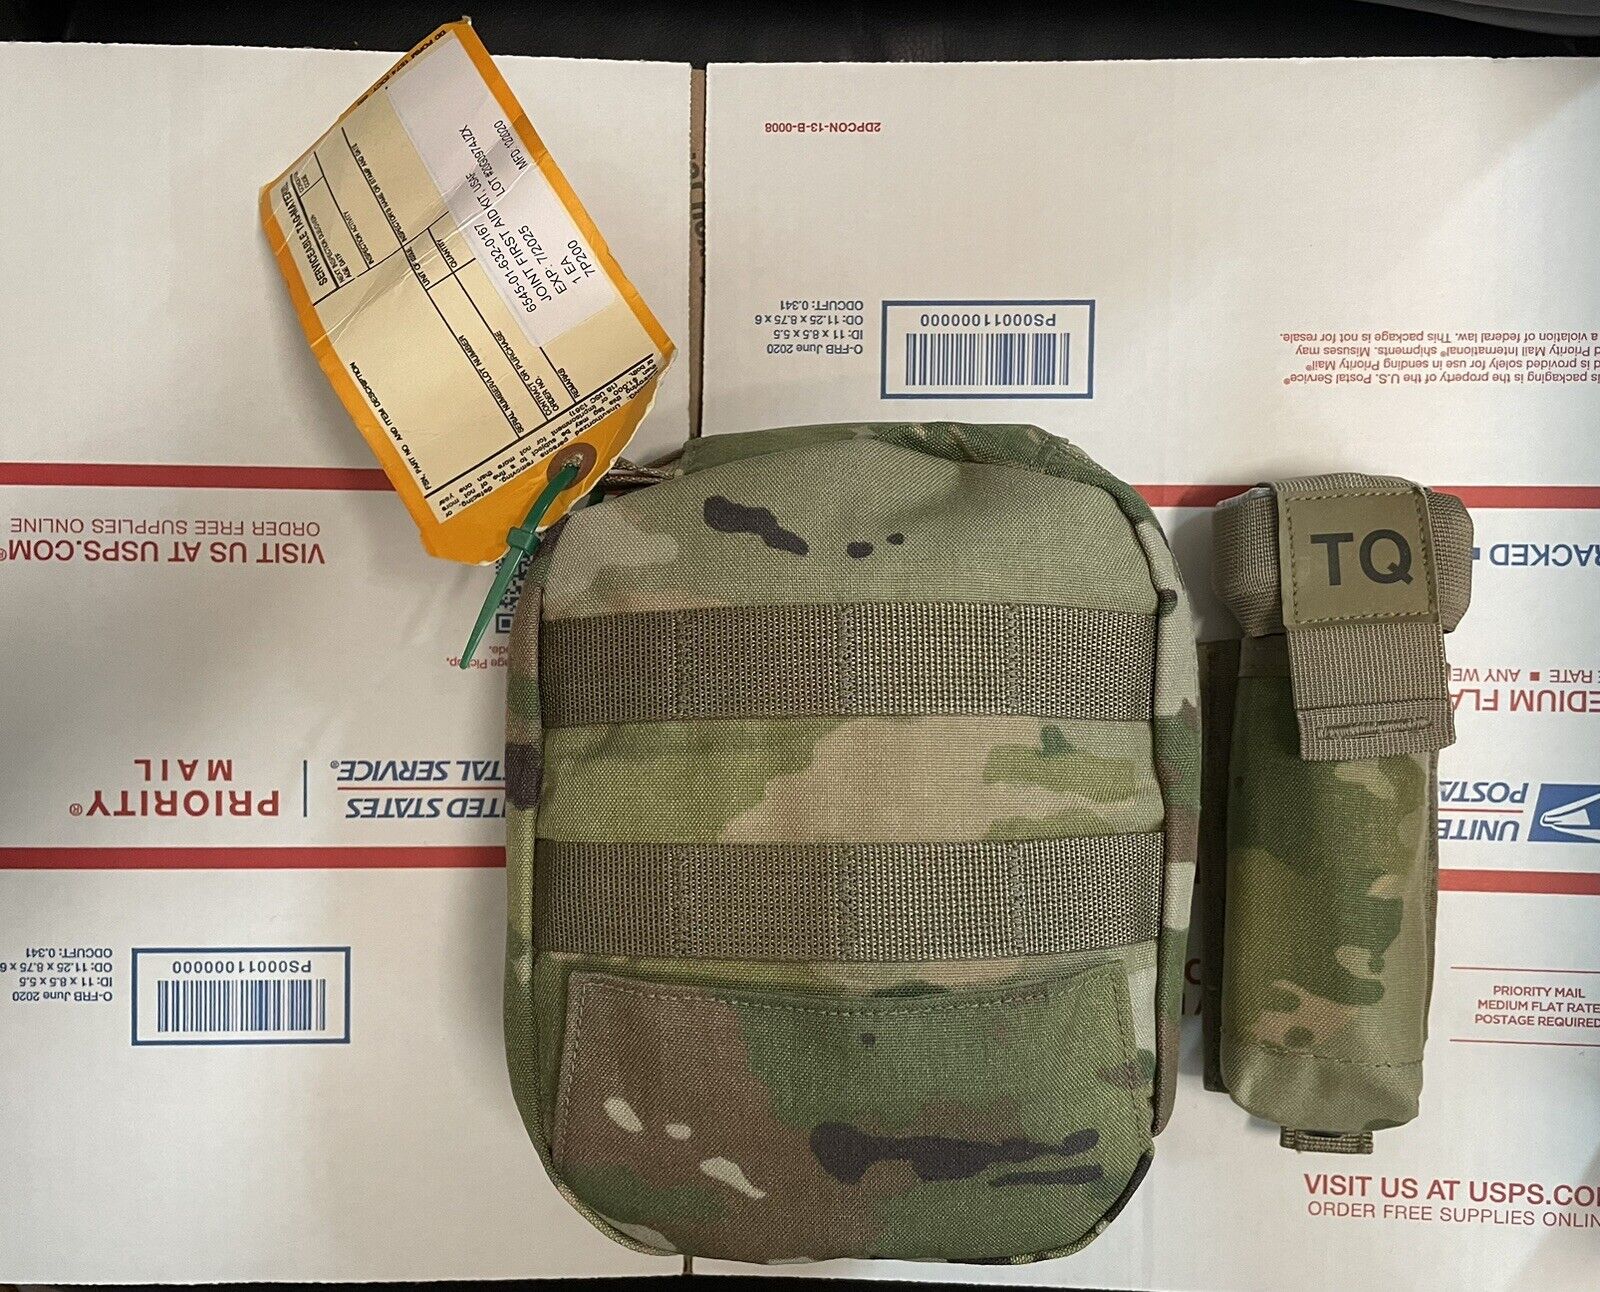 US AIR FORCE OCP JFAK (JOINT FIRST AID KIT) POUCH W/ Contents